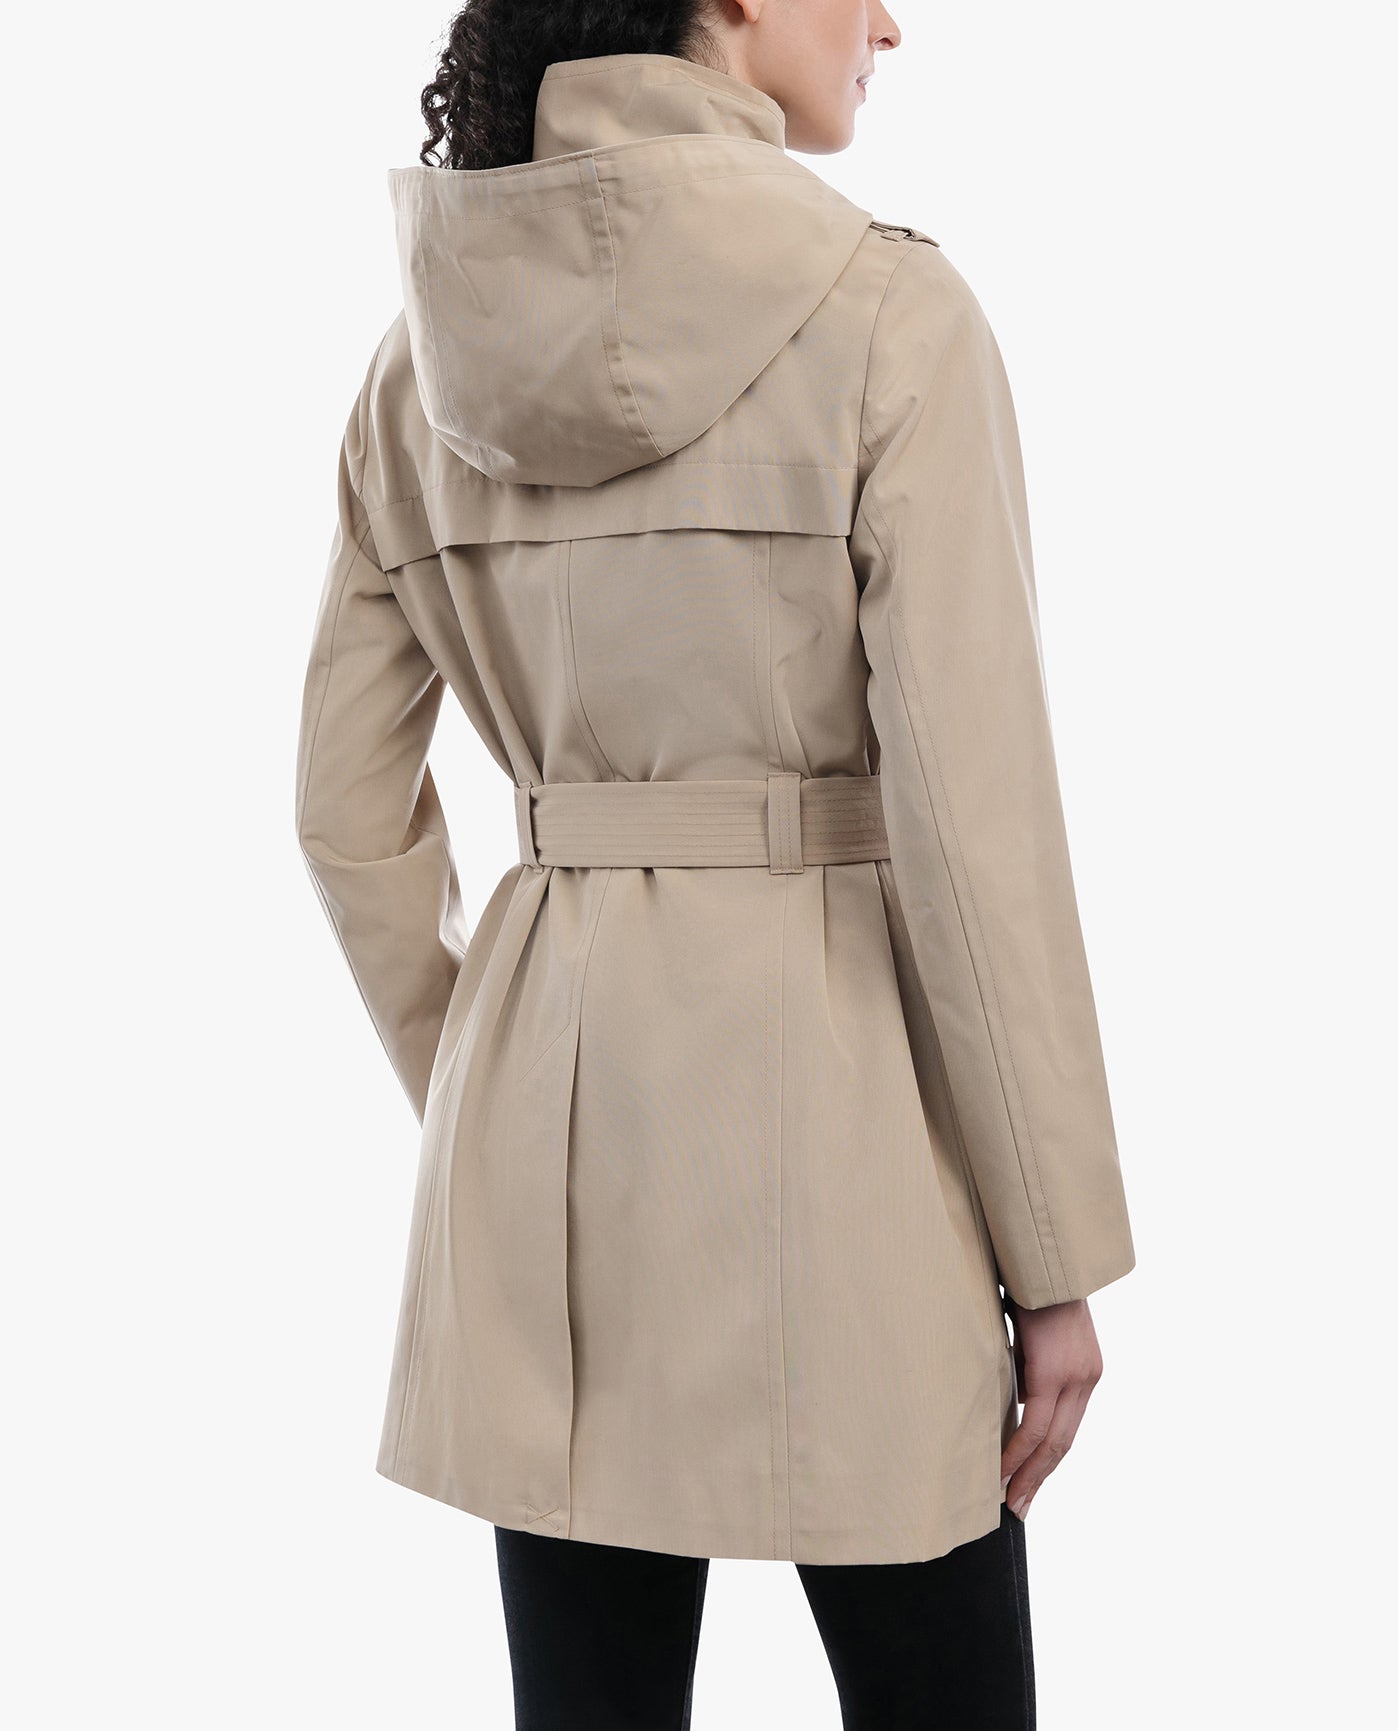 BACK OF  ZIP FRONT HOODED TRENCH WITH BELT | BROWN KHAKI